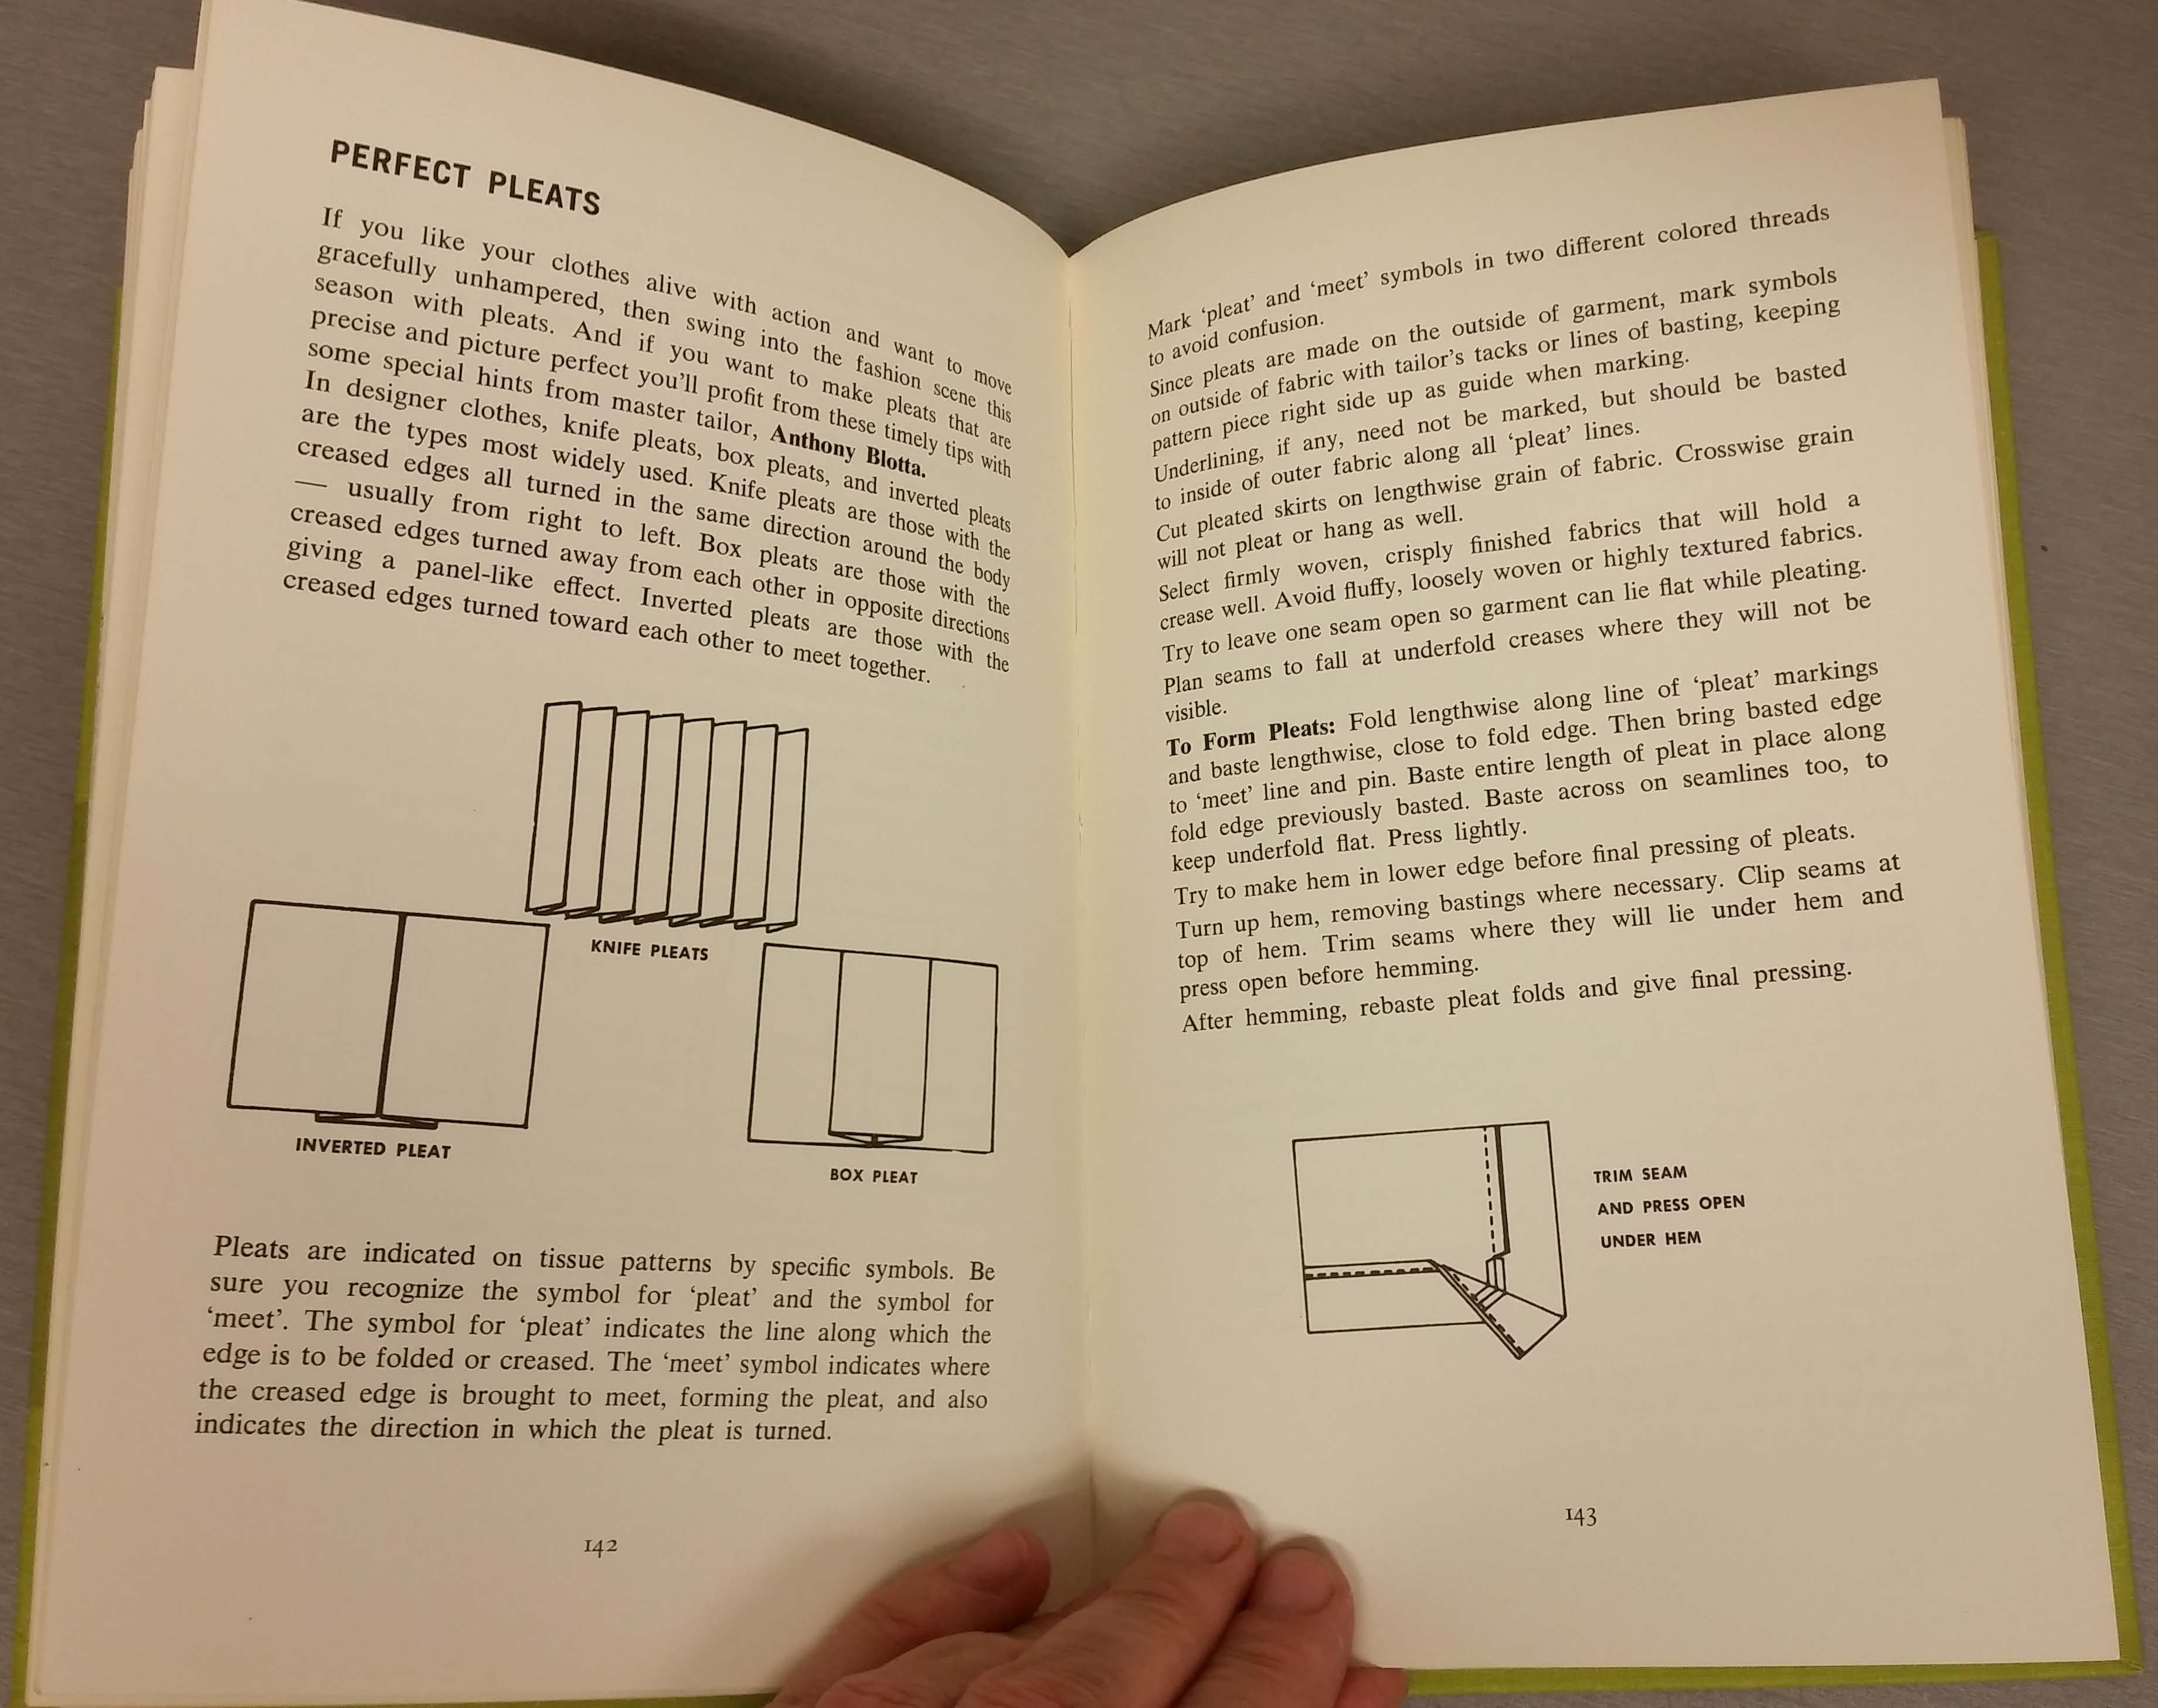 Sewing tips on pleats from Spadea book